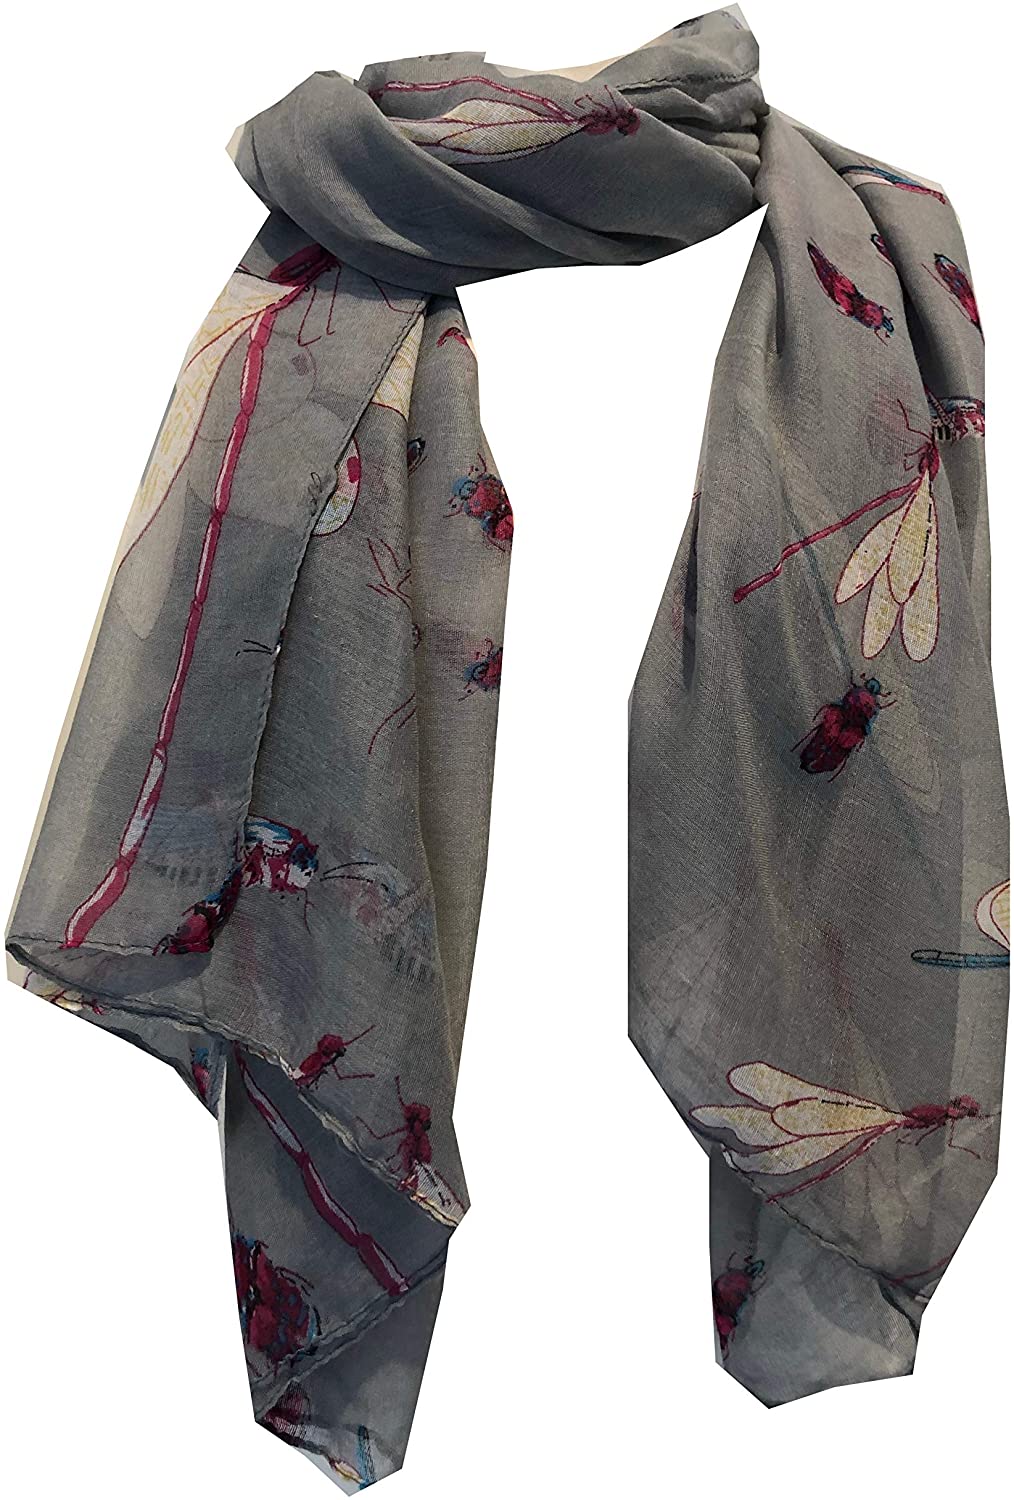 Pamper Yourself Now Grey with Dragonfly and Bugs Design Long Soft Scarf, Great Present/Gift.